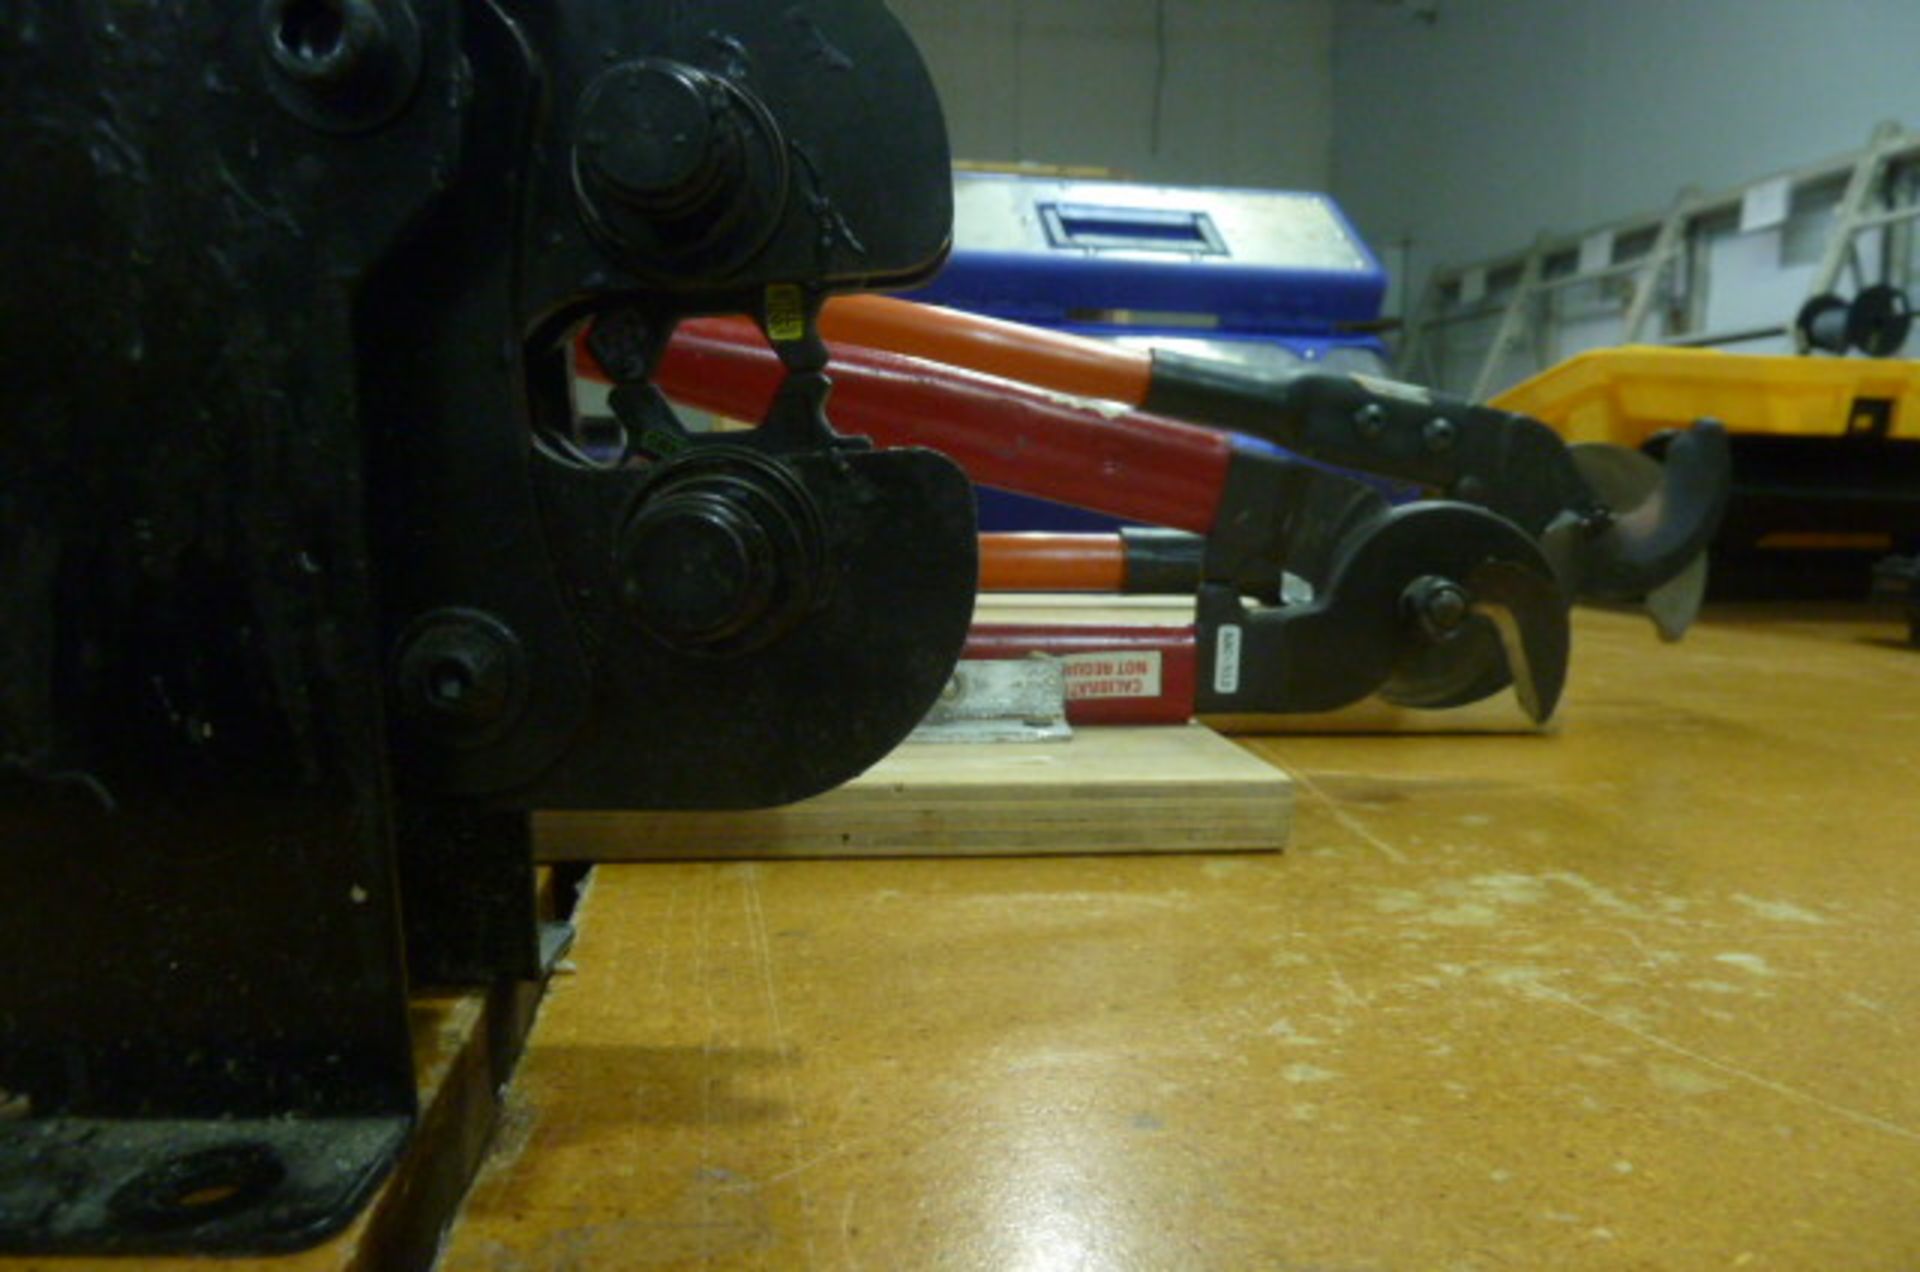 Industrial bench type crimper and cable cutters - Image 2 of 6